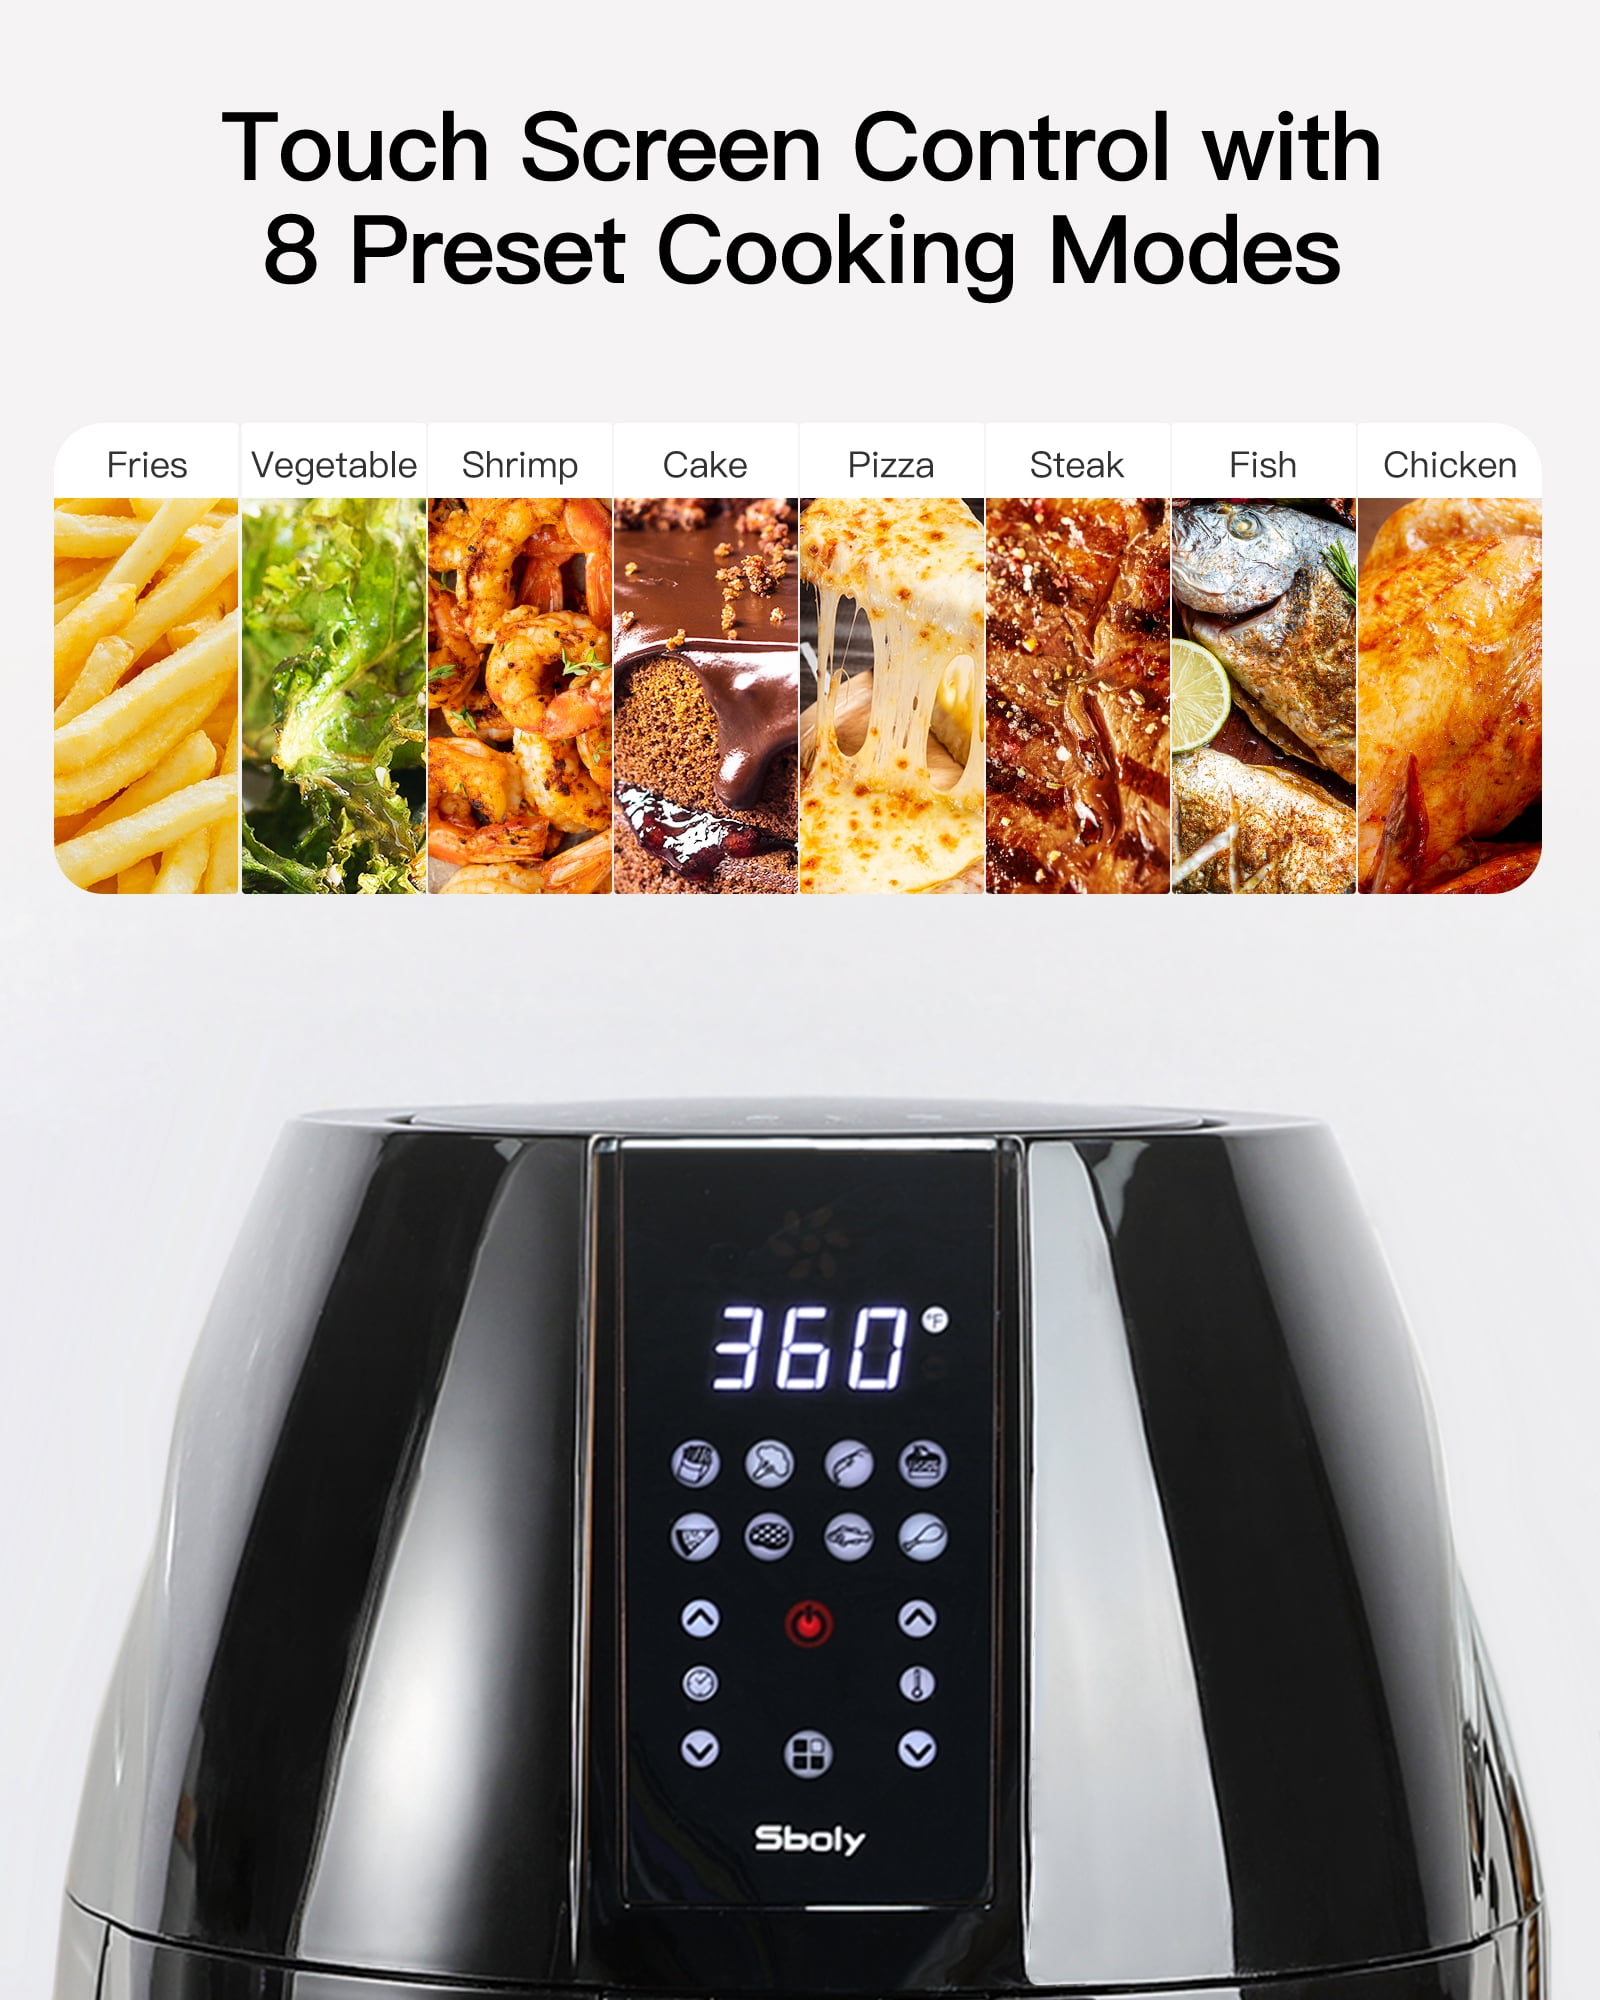 Air Fryer 5.3 QT, 8-in-1 Compact Hot Air Fryers, Electric Oilless Small  Airfryer with Digital LCD Touch Screen, Non-Stick Basket, Recipe Book and  Disposable Paper Liners, Gift for Mom Women Wife 